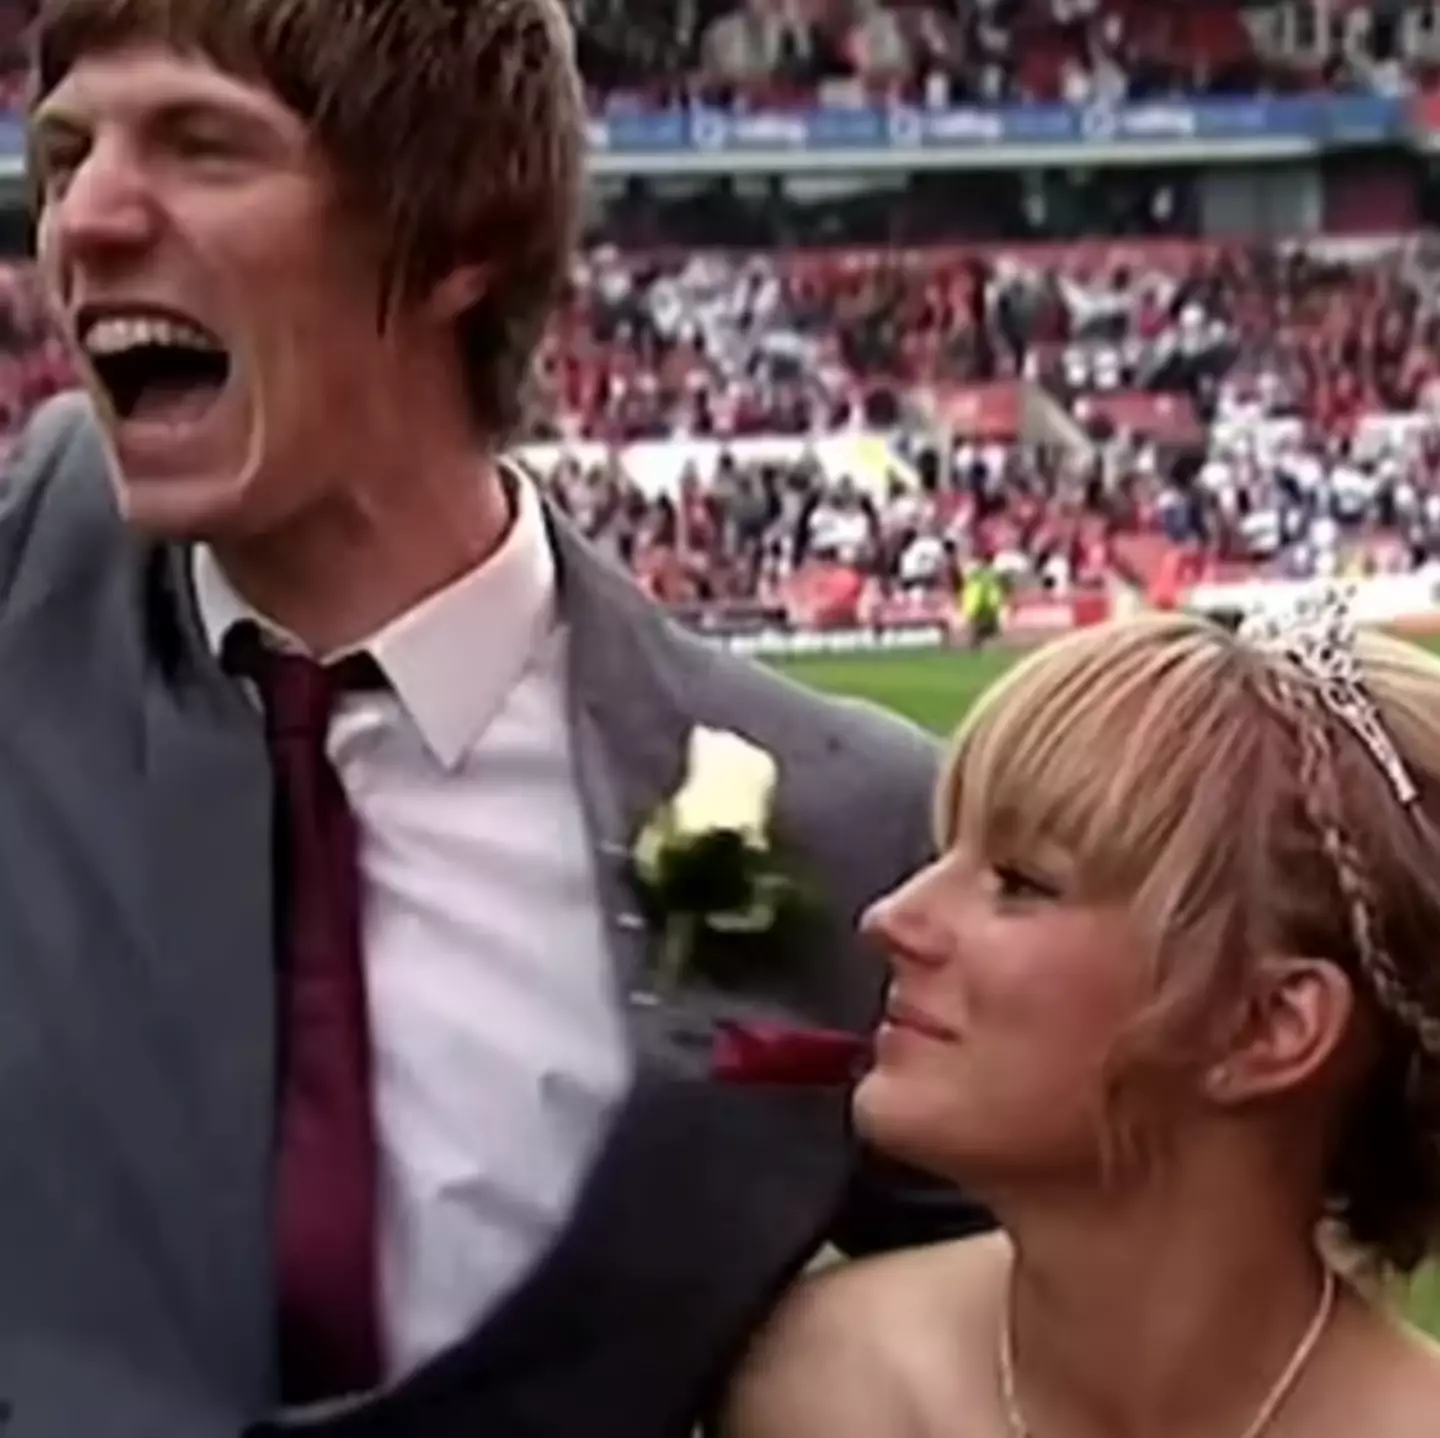 The couple ended up getting married on the pitch at Stoke City.